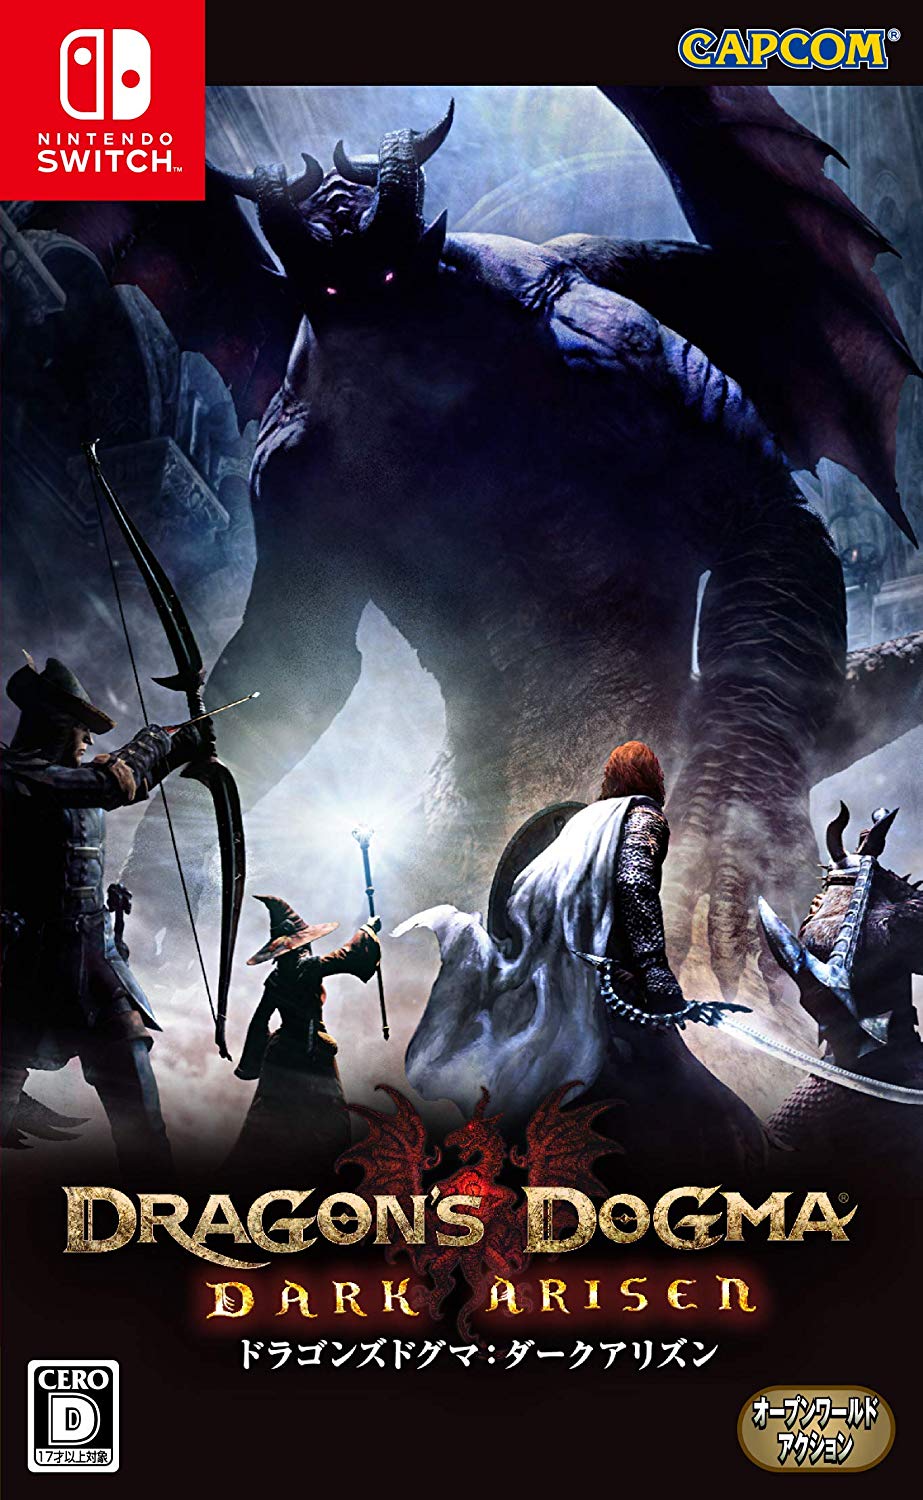 Dragon's Dogma: Dark Arisen Collector's Package Up For Pre Order